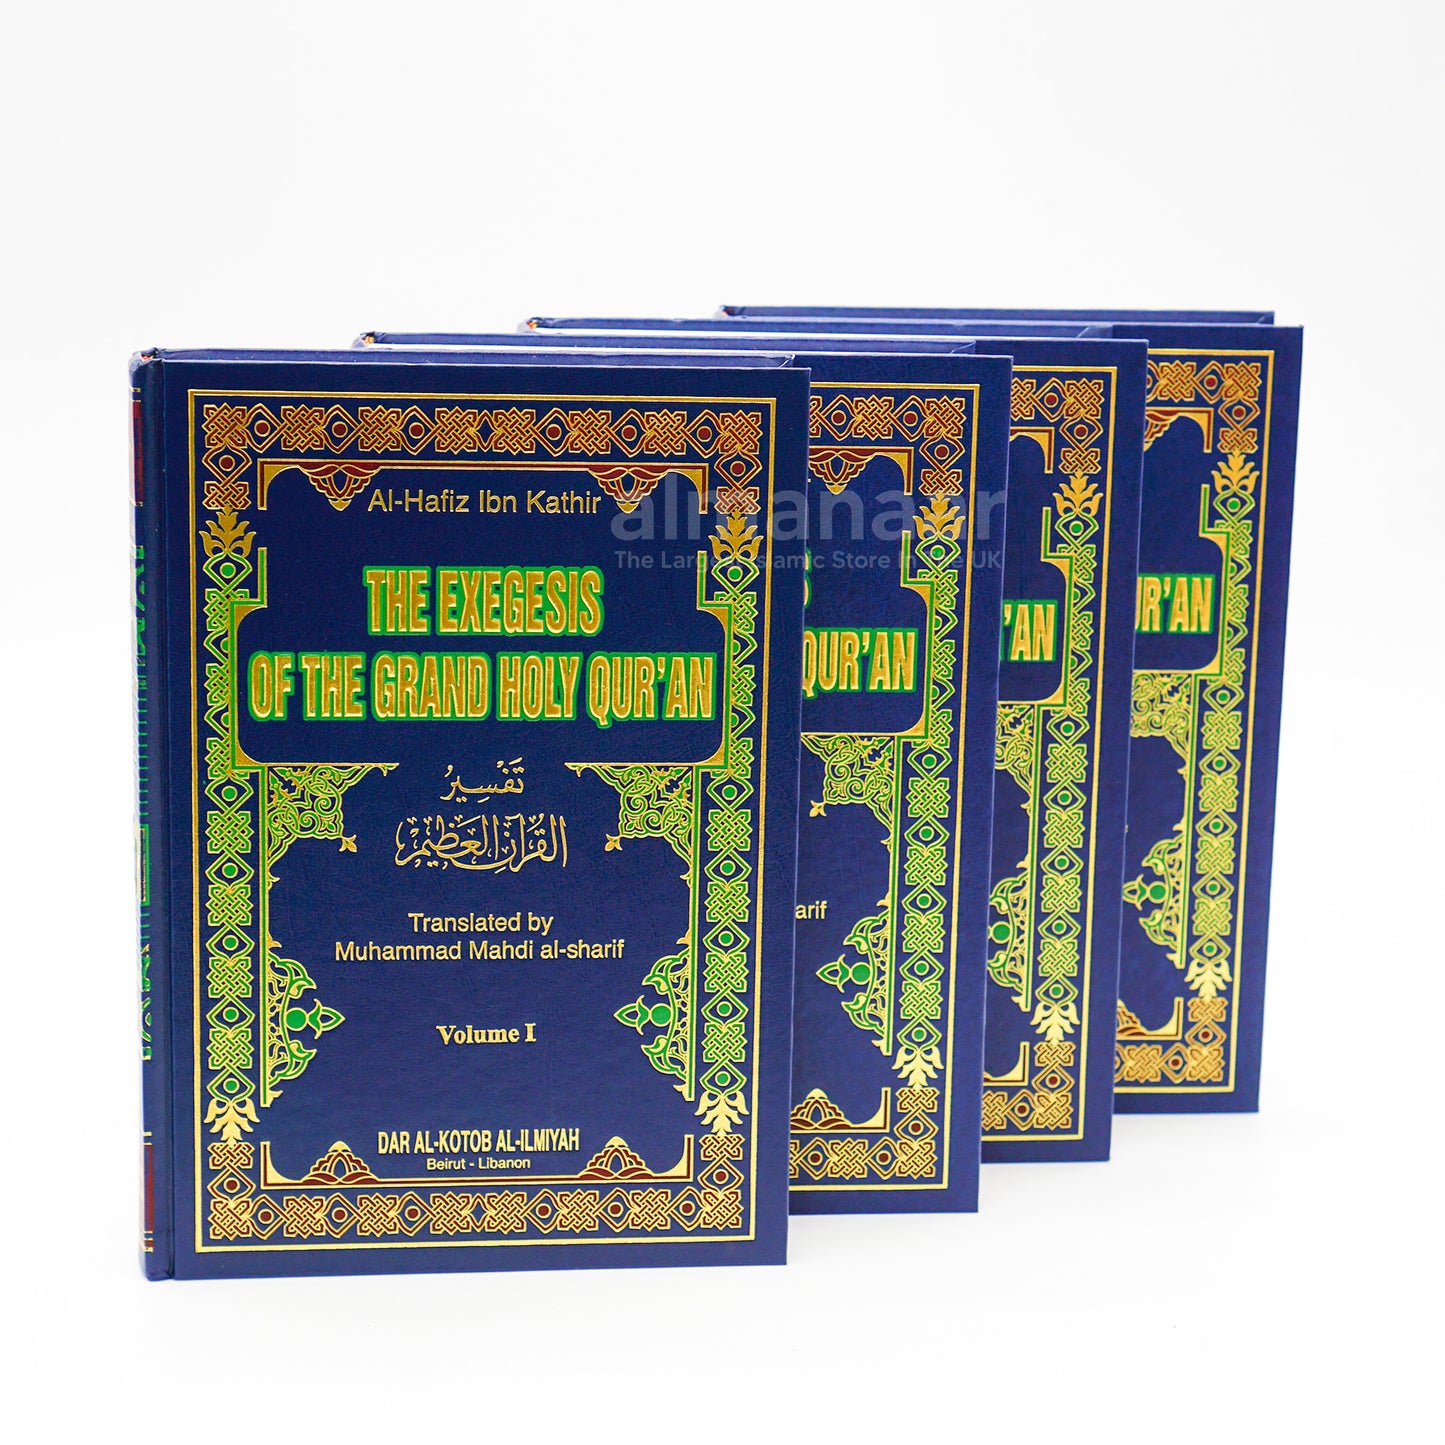 Tafsir Ibn Kathir: Exegesis Of The Grand Holy Qur'an (Arb-Eng) Set of 4 Volumes